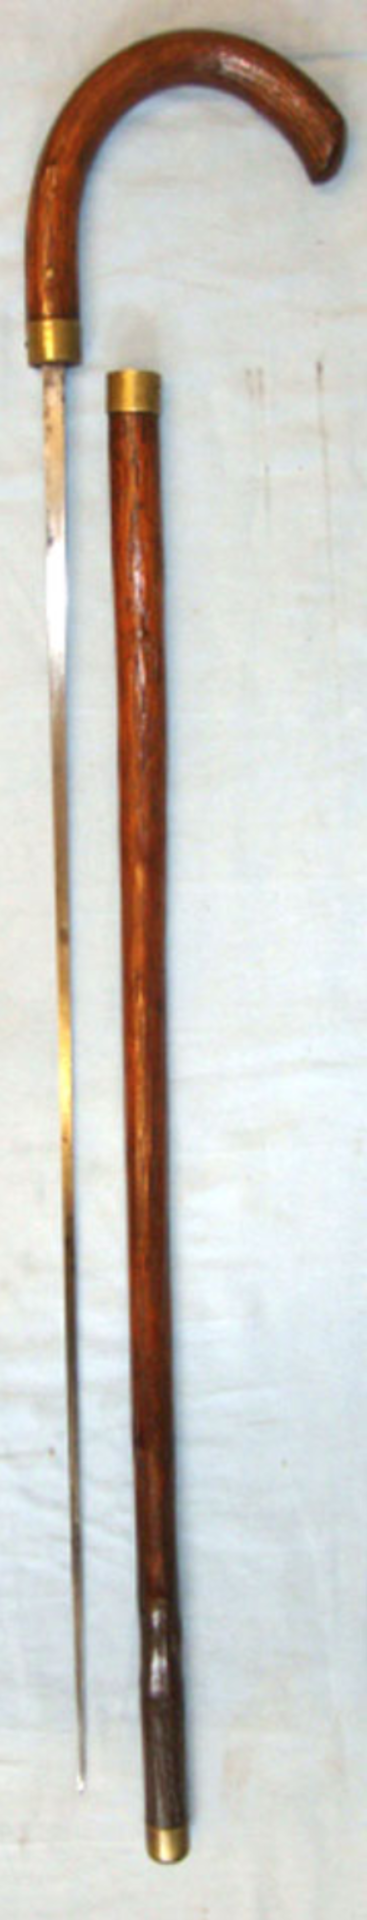 Victorian Customs Officer's Briar Sword Stick By Mole Birmingham. - Image 2 of 3